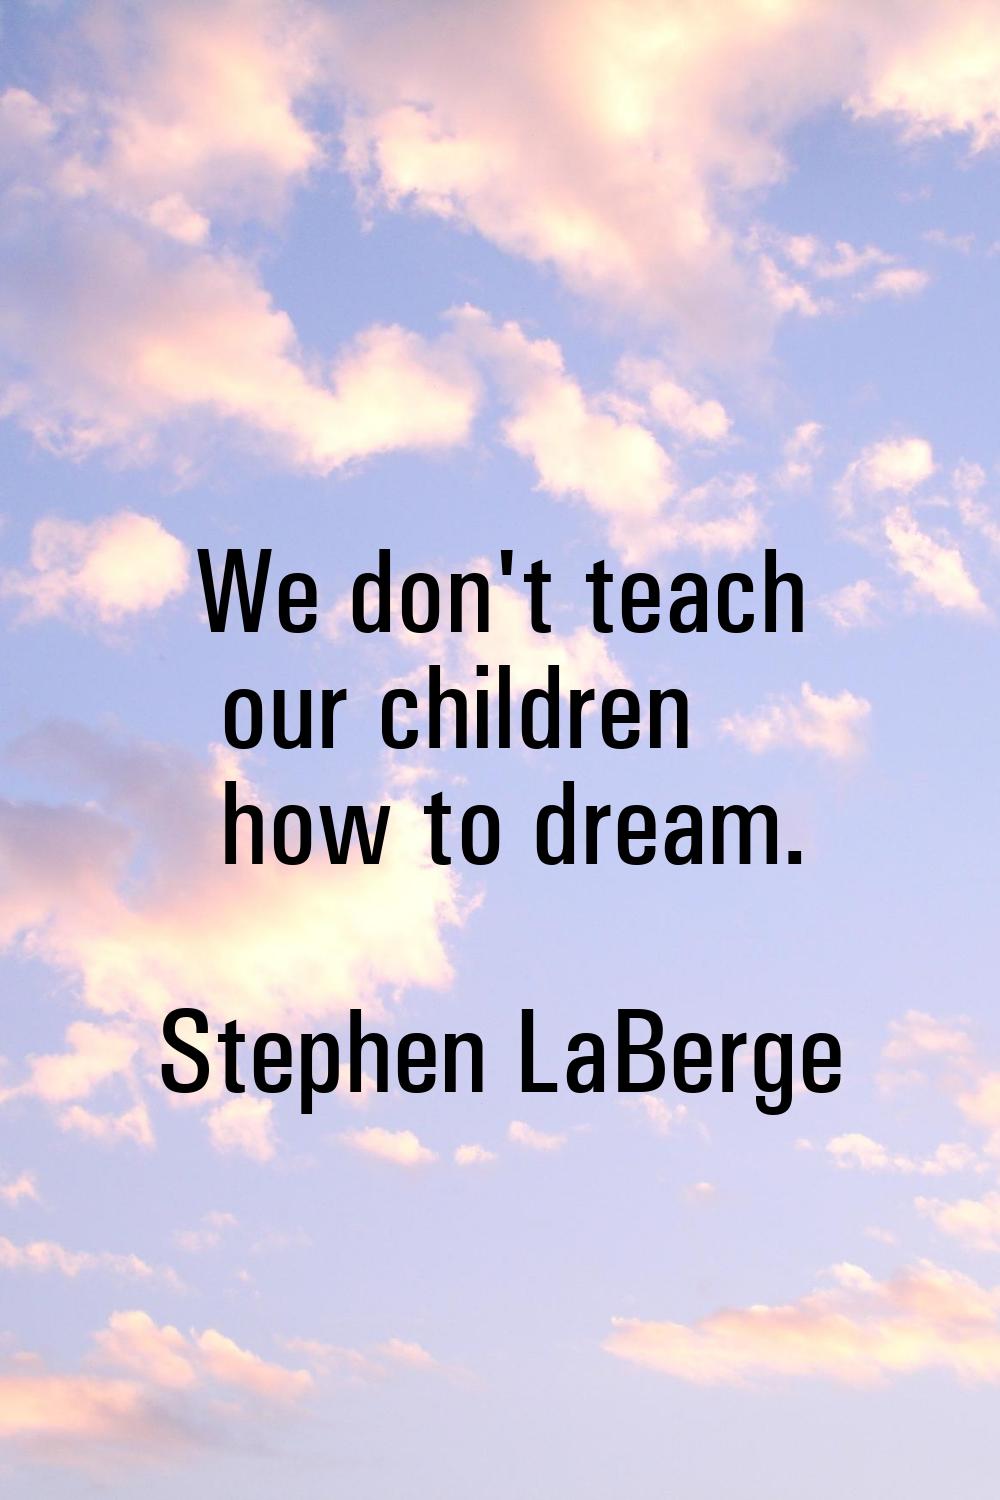 We don't teach our children how to dream.